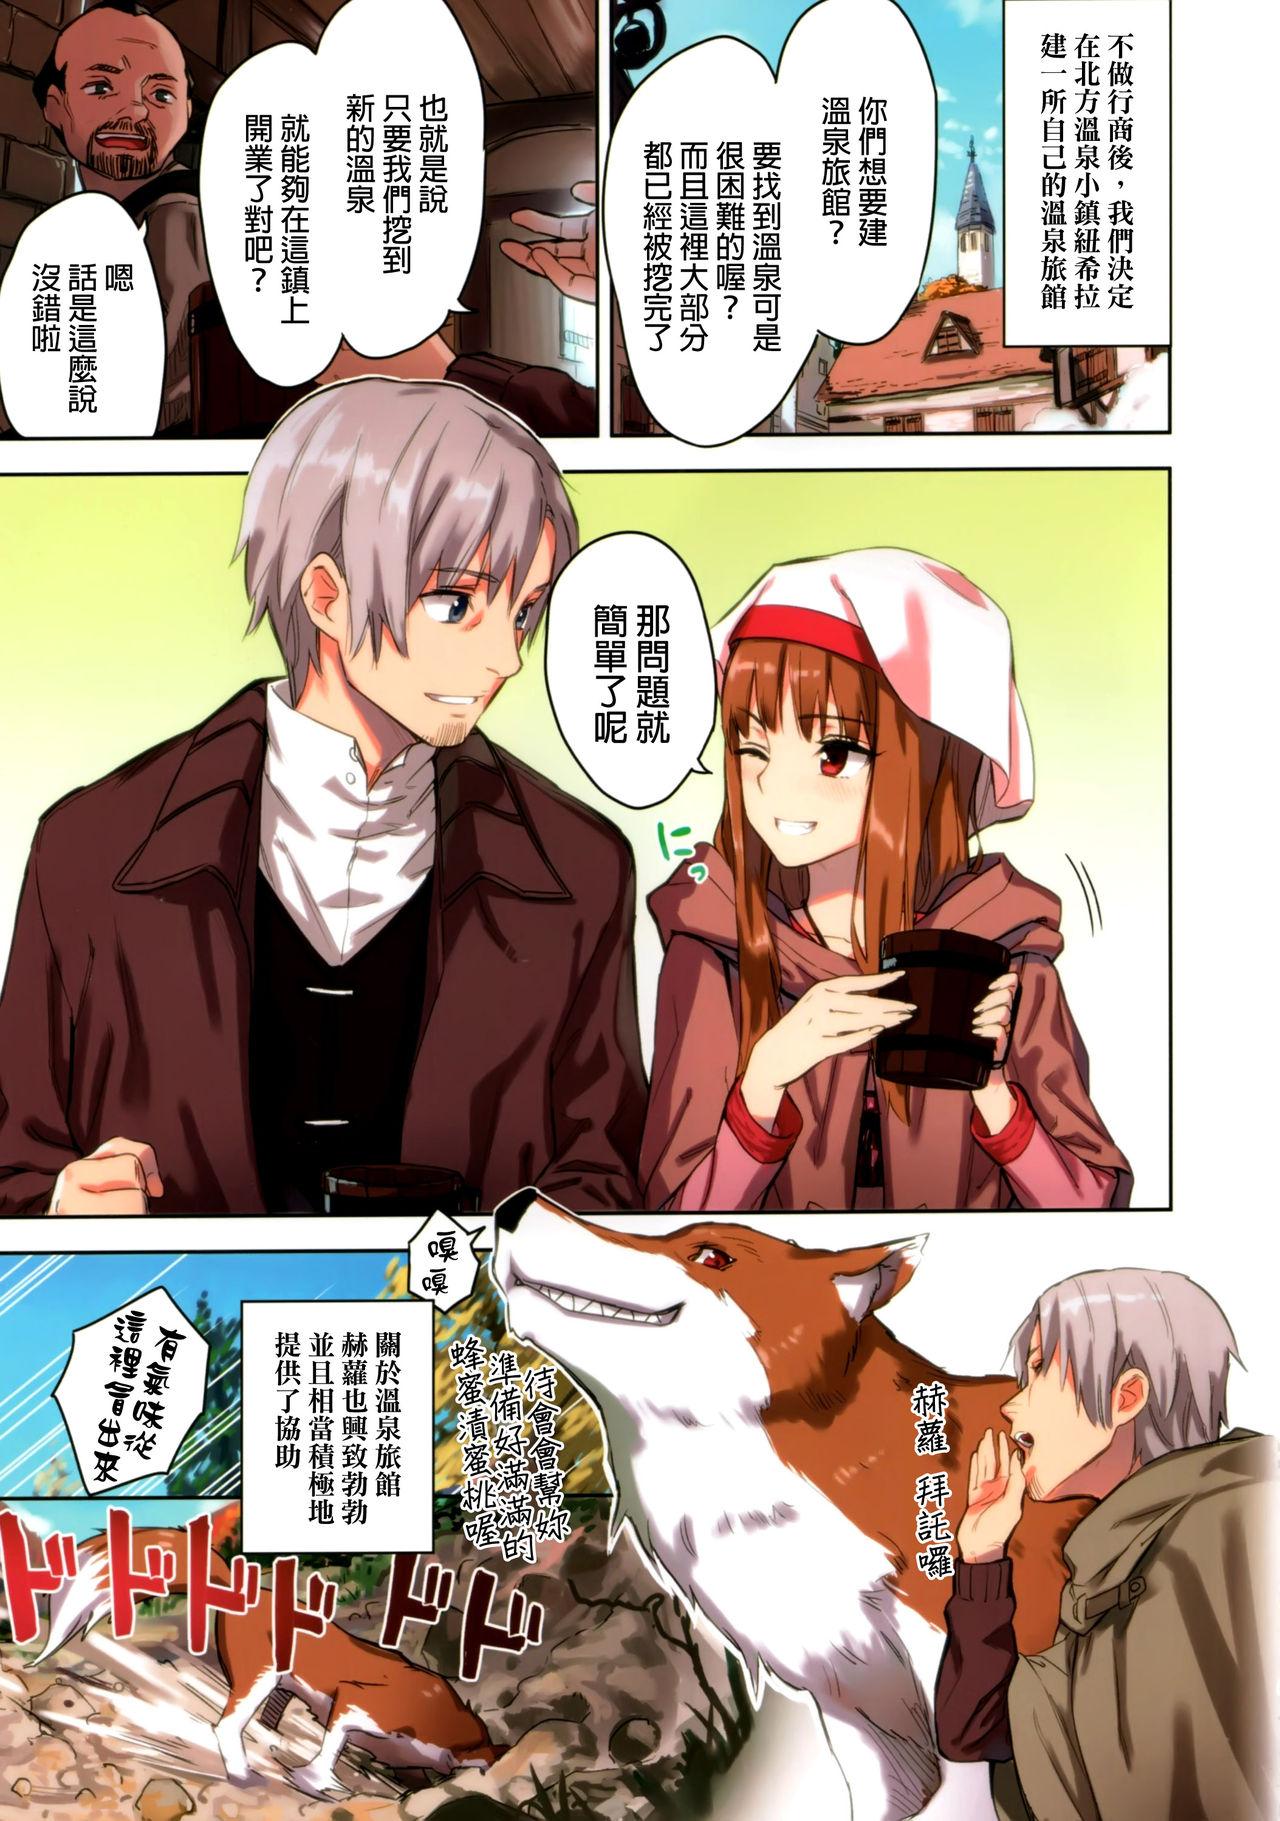 Rough Sex Wacchi to Nyohhira Bon FULL COLOR - Spice and wolf Gay Natural - Page 6